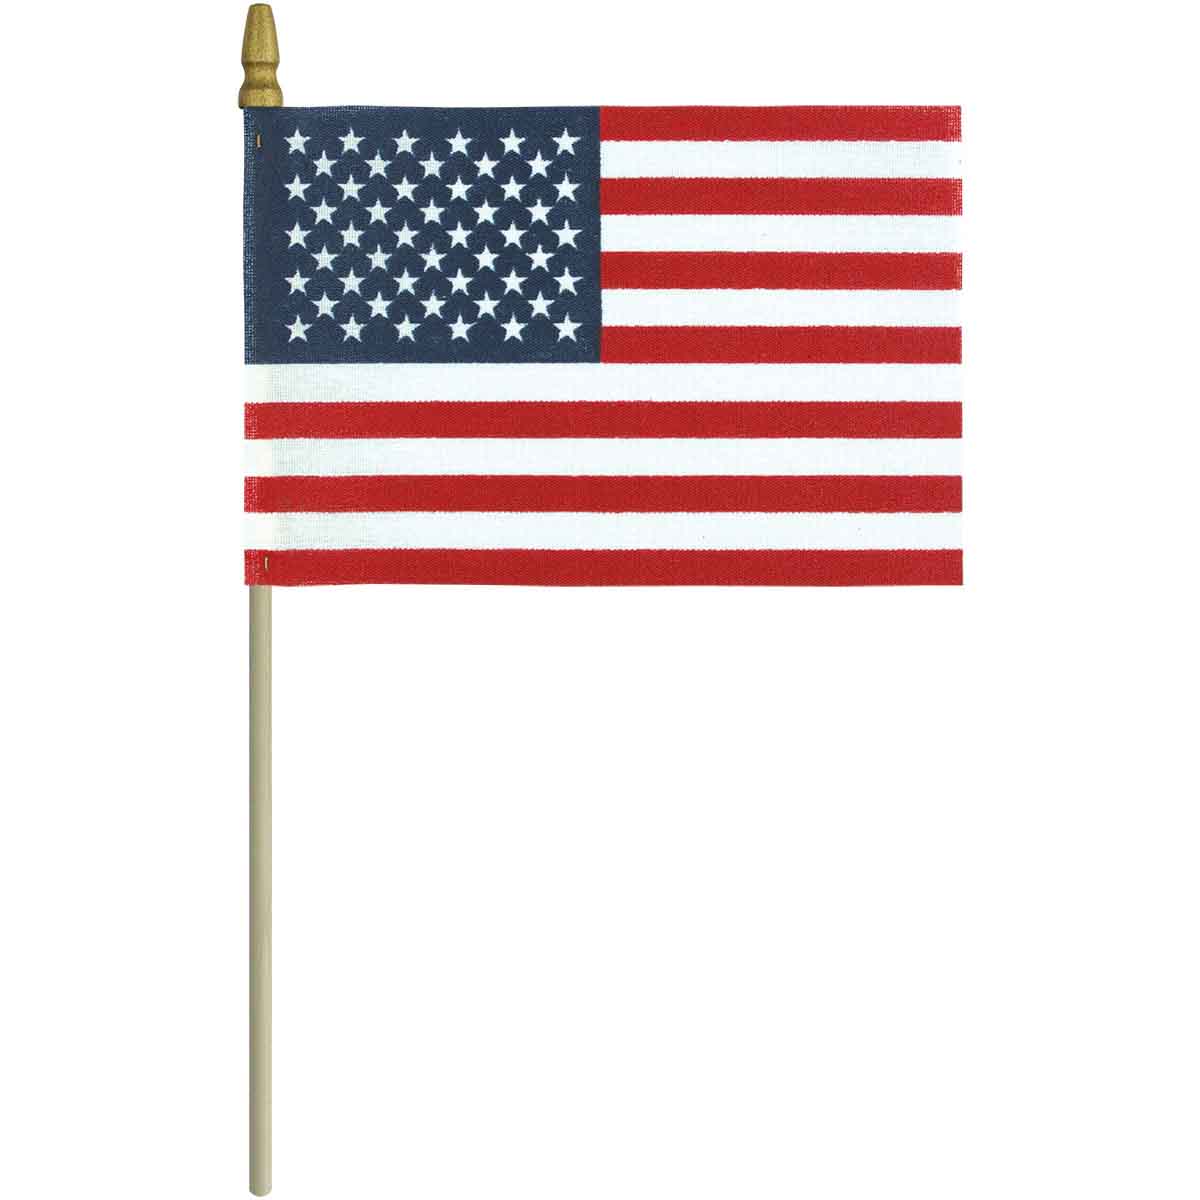 US Mounted Flags, no-fray poly-cotton with gold spear